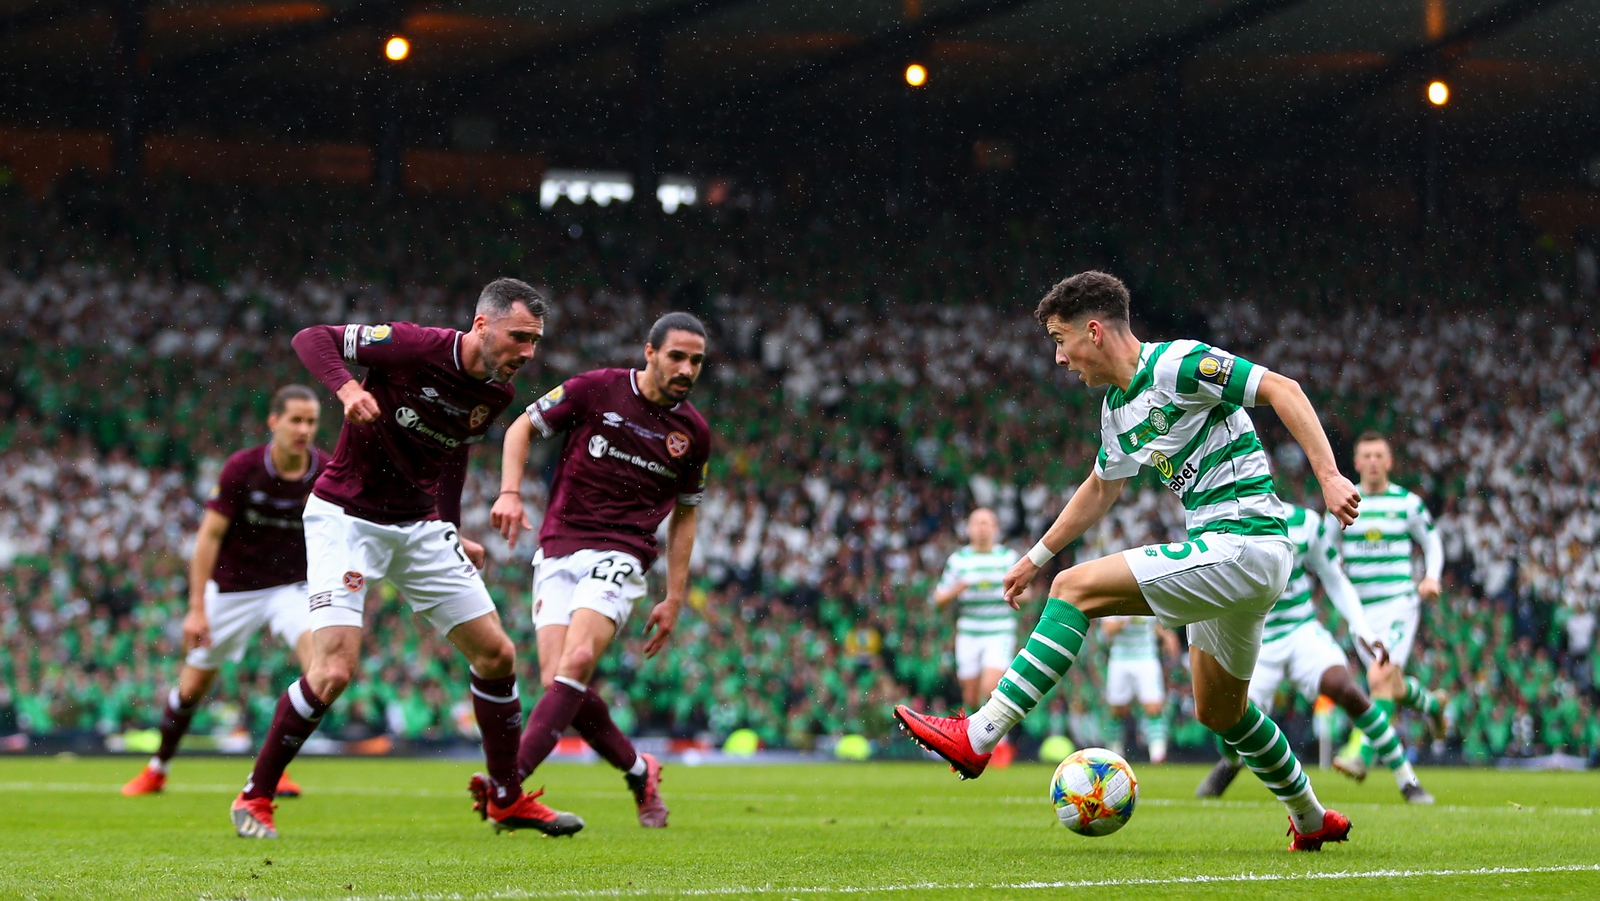 Celtic complete treble with Cup victory over Hearts